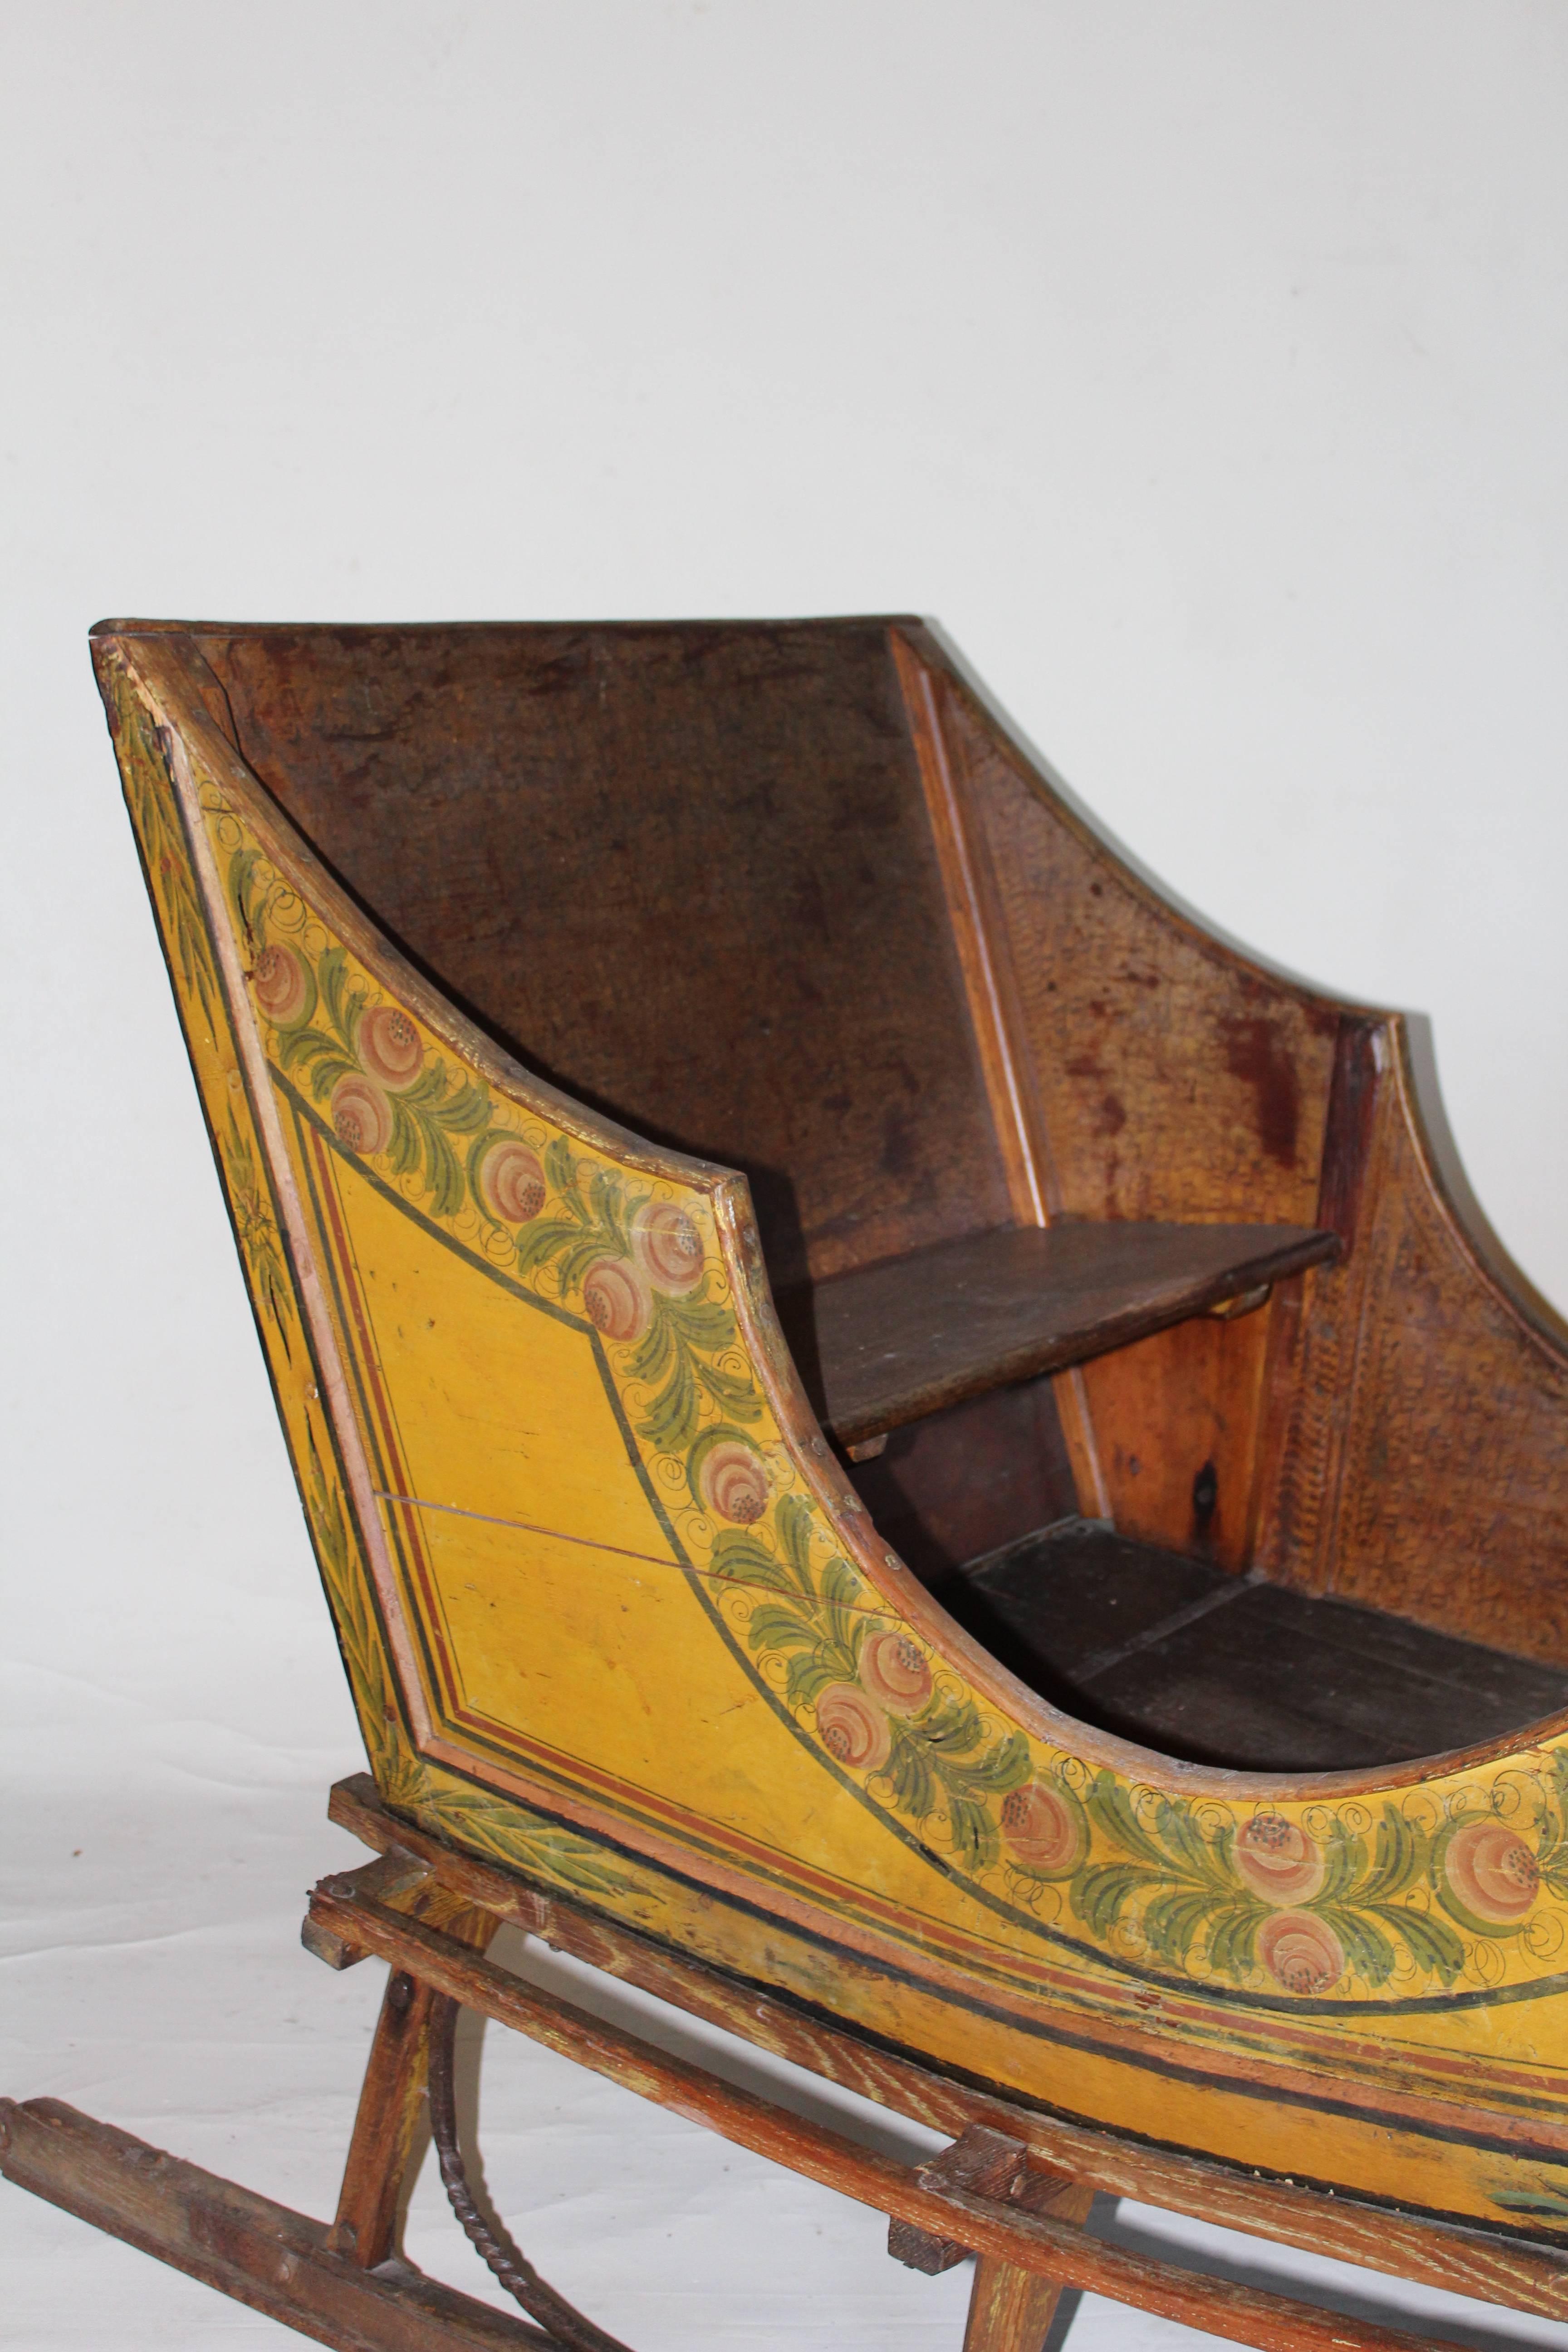 Wonderfully small in scale and retaining its original floral decorated surface, this unique horse-drawn sleigh is the kind of interesting item we have always loved finding. The sleigh is decorated in repeating rose and leaf motifs with an outer